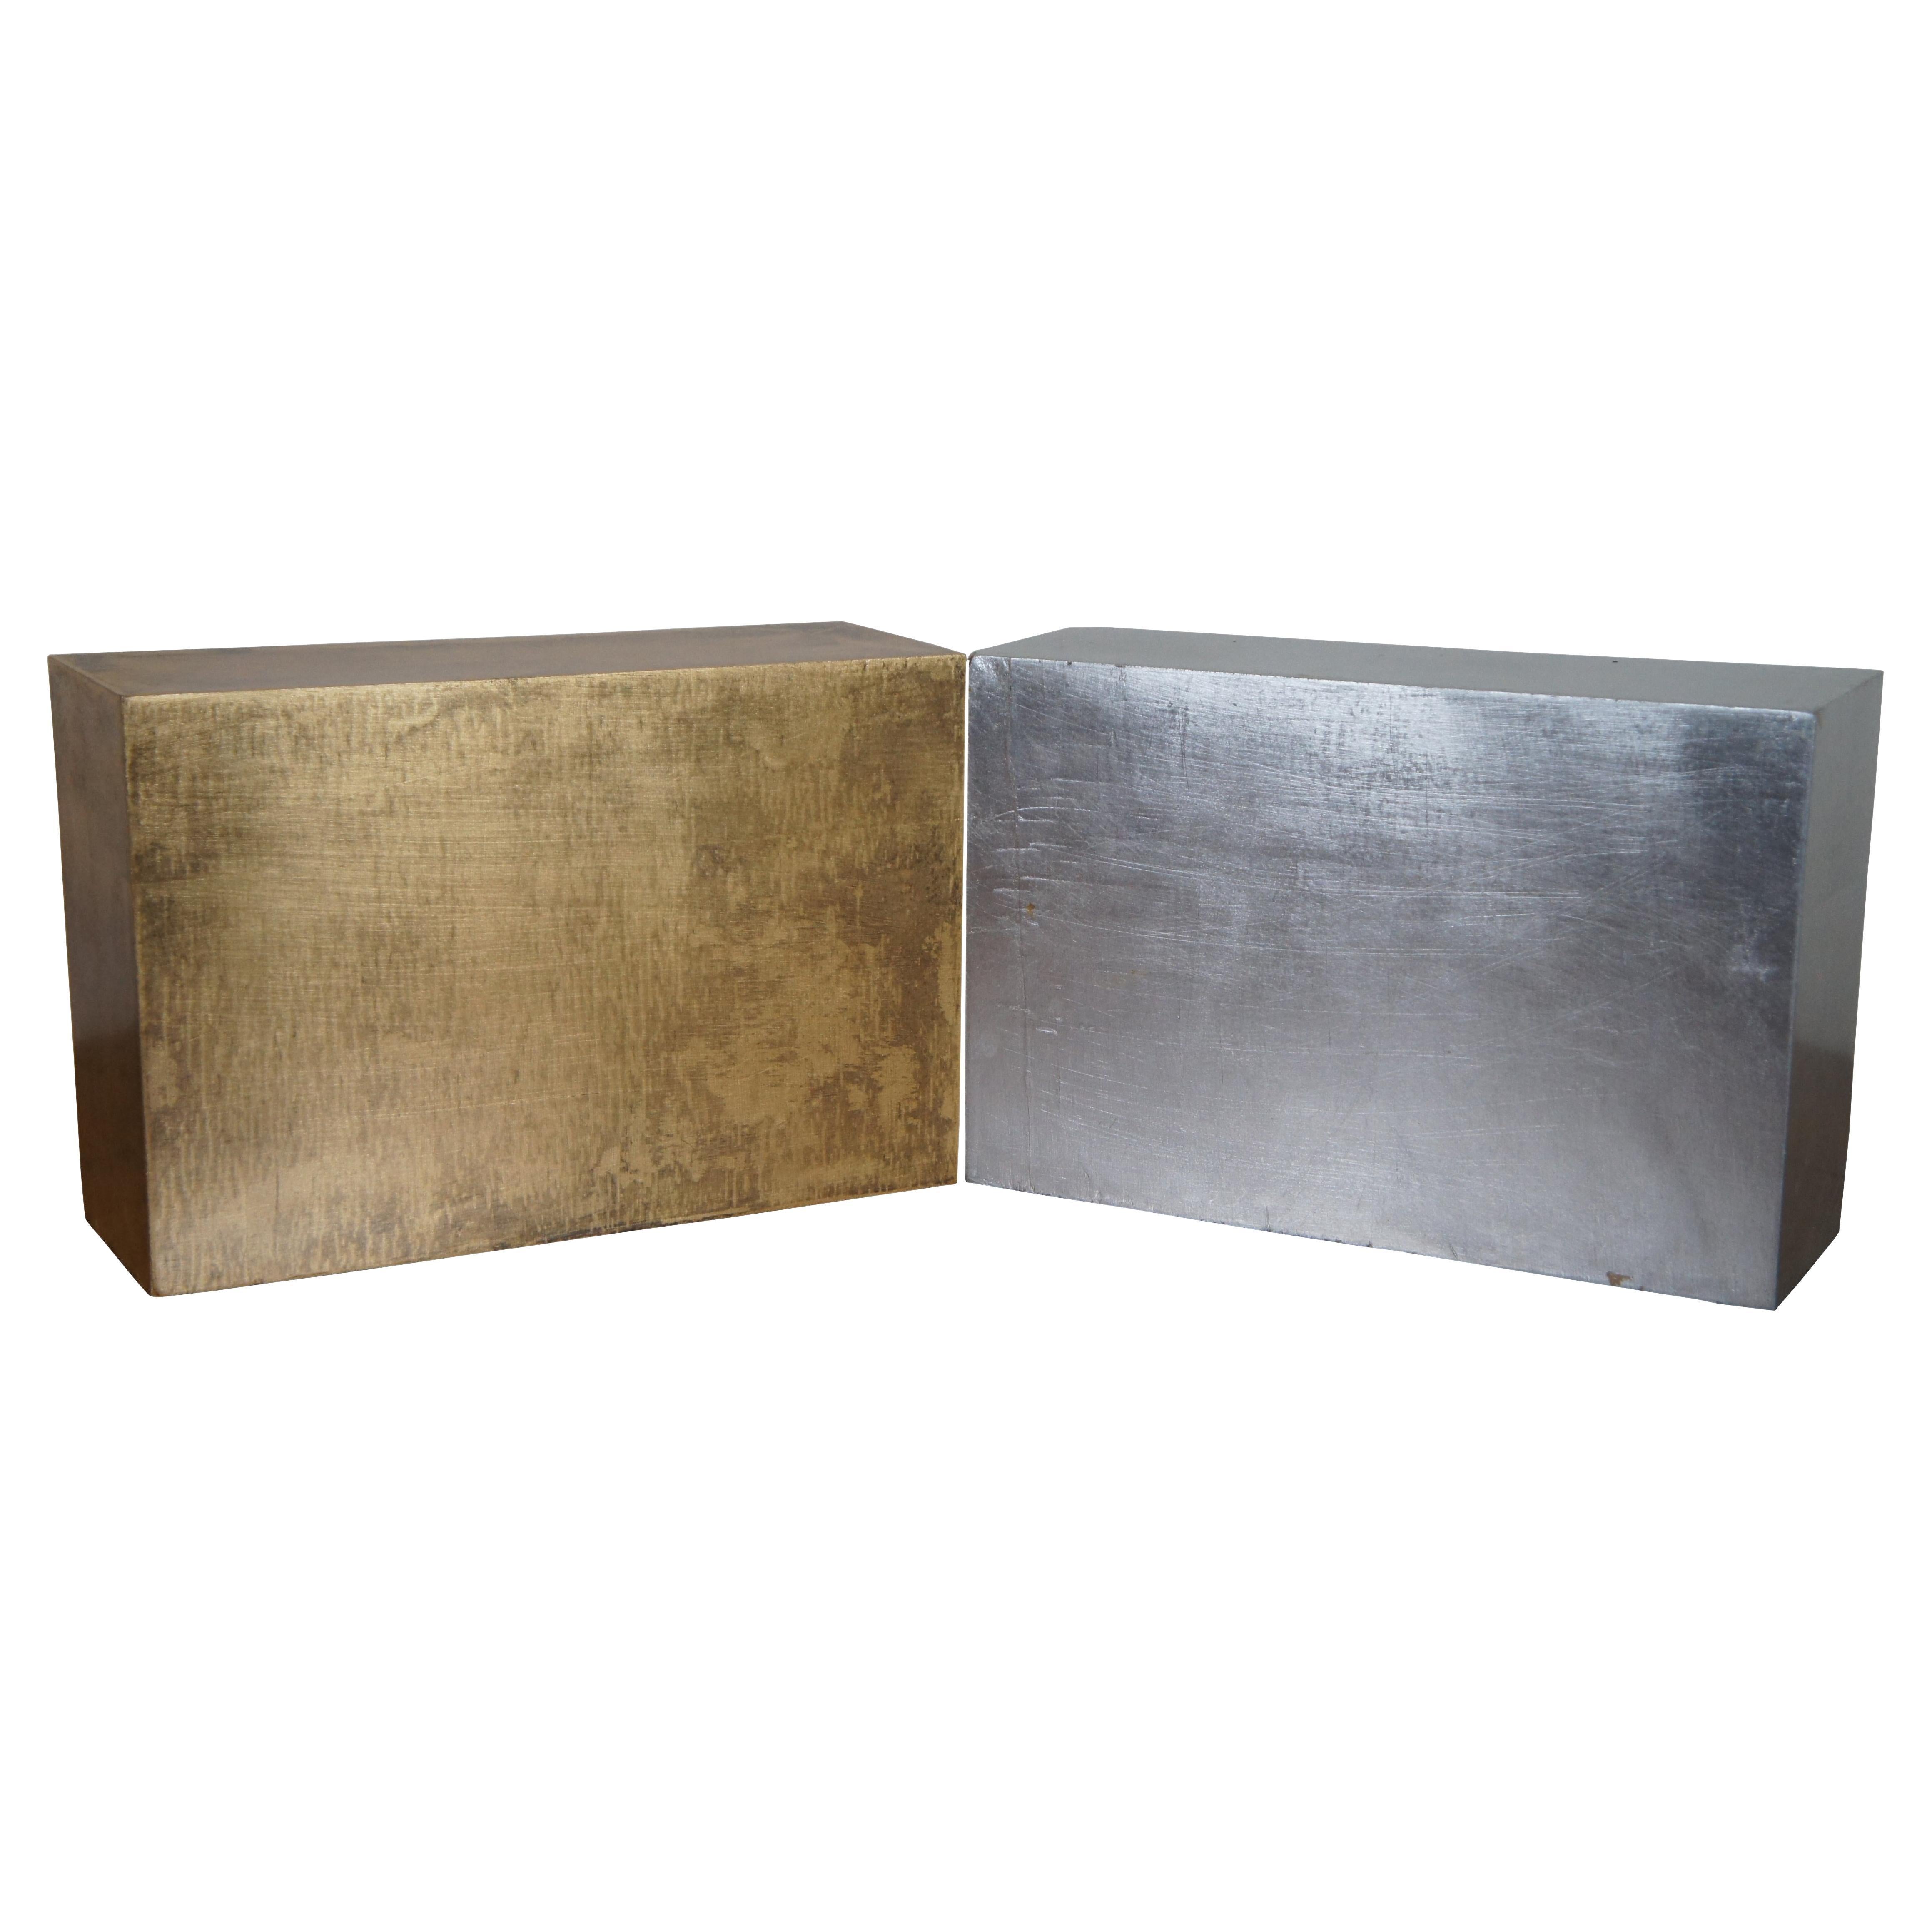 2 Global Views Inc Silver & Gold Wooden Wall Hanging Modern Boxed Shelves